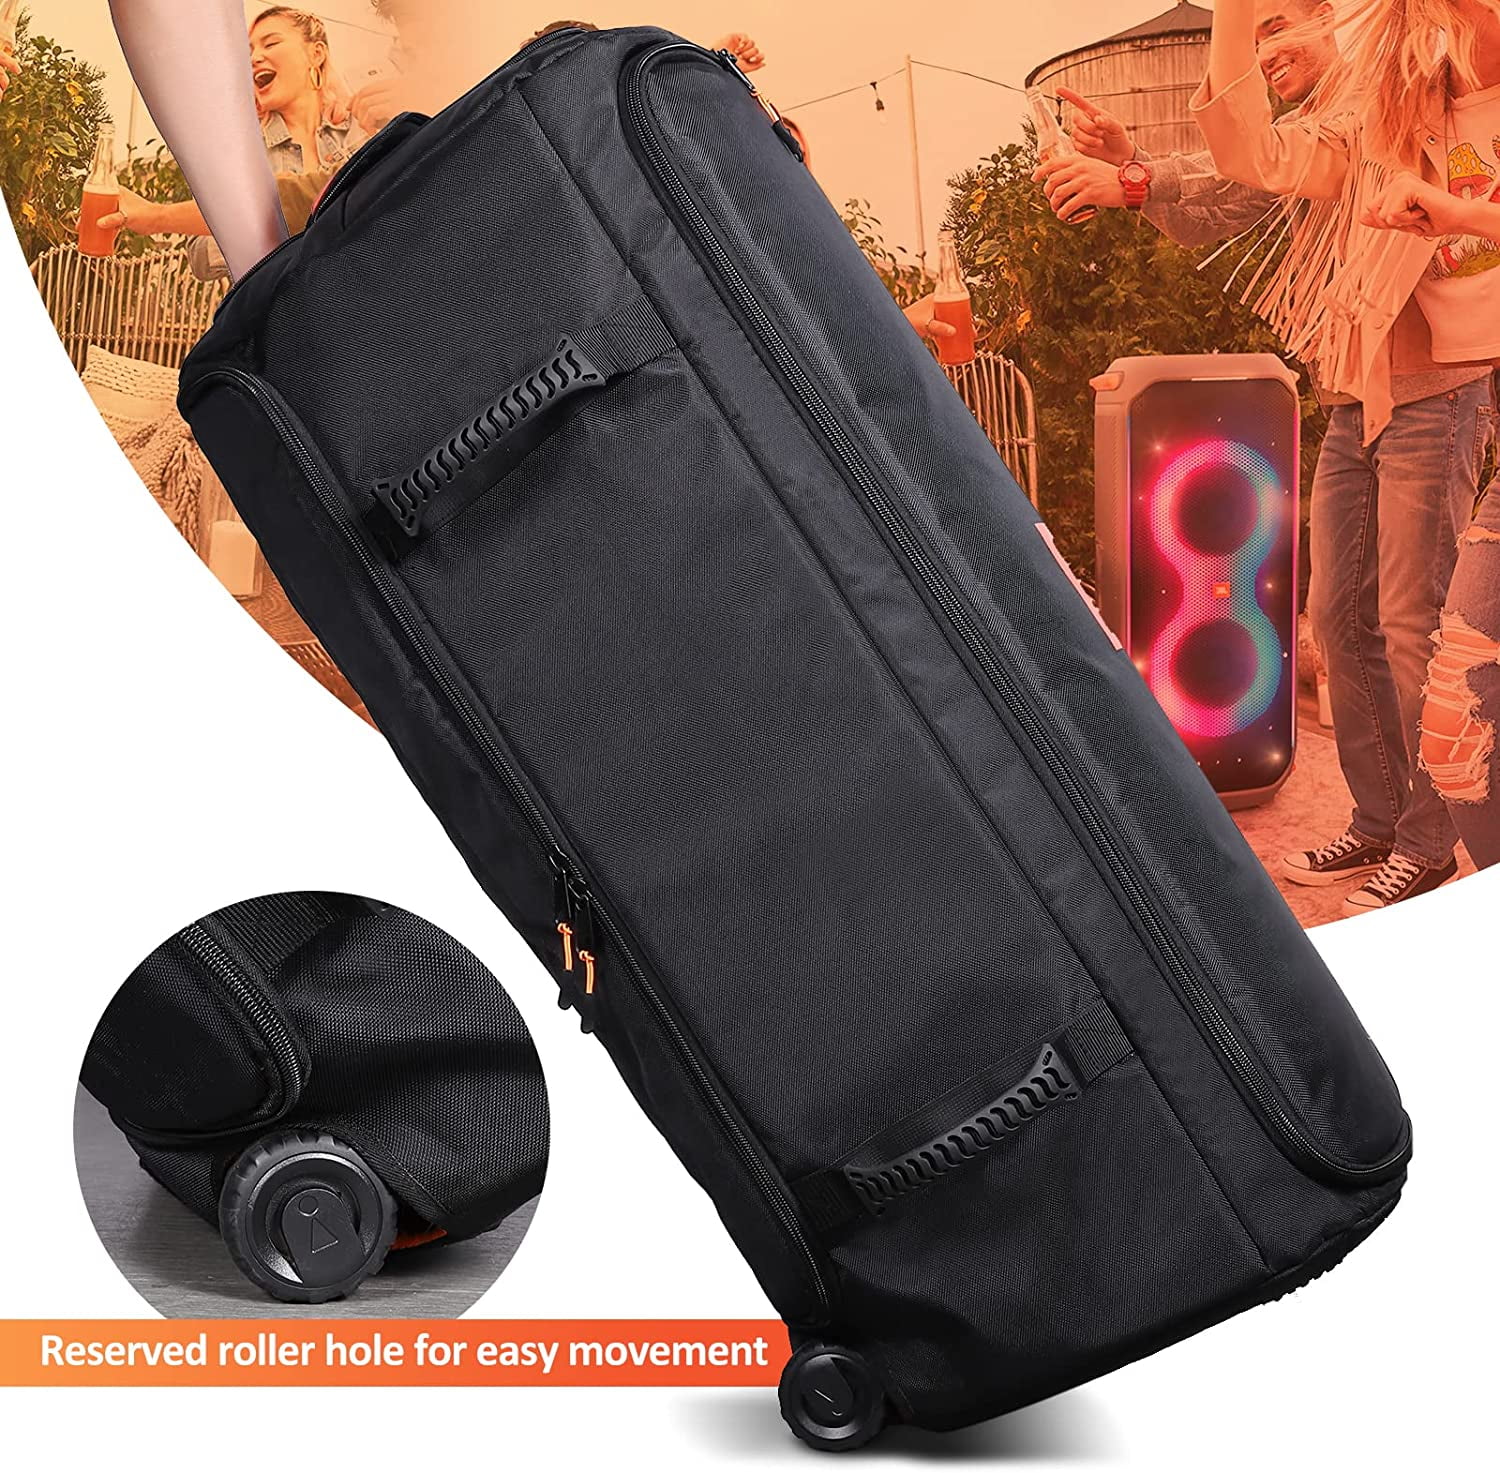 Partybox 310 Case,Rummyluck Protective Case Bag Sleeve for JBL Partybox 310  Portable Party Speaker,Portable Multifuctional Cover with Microphone